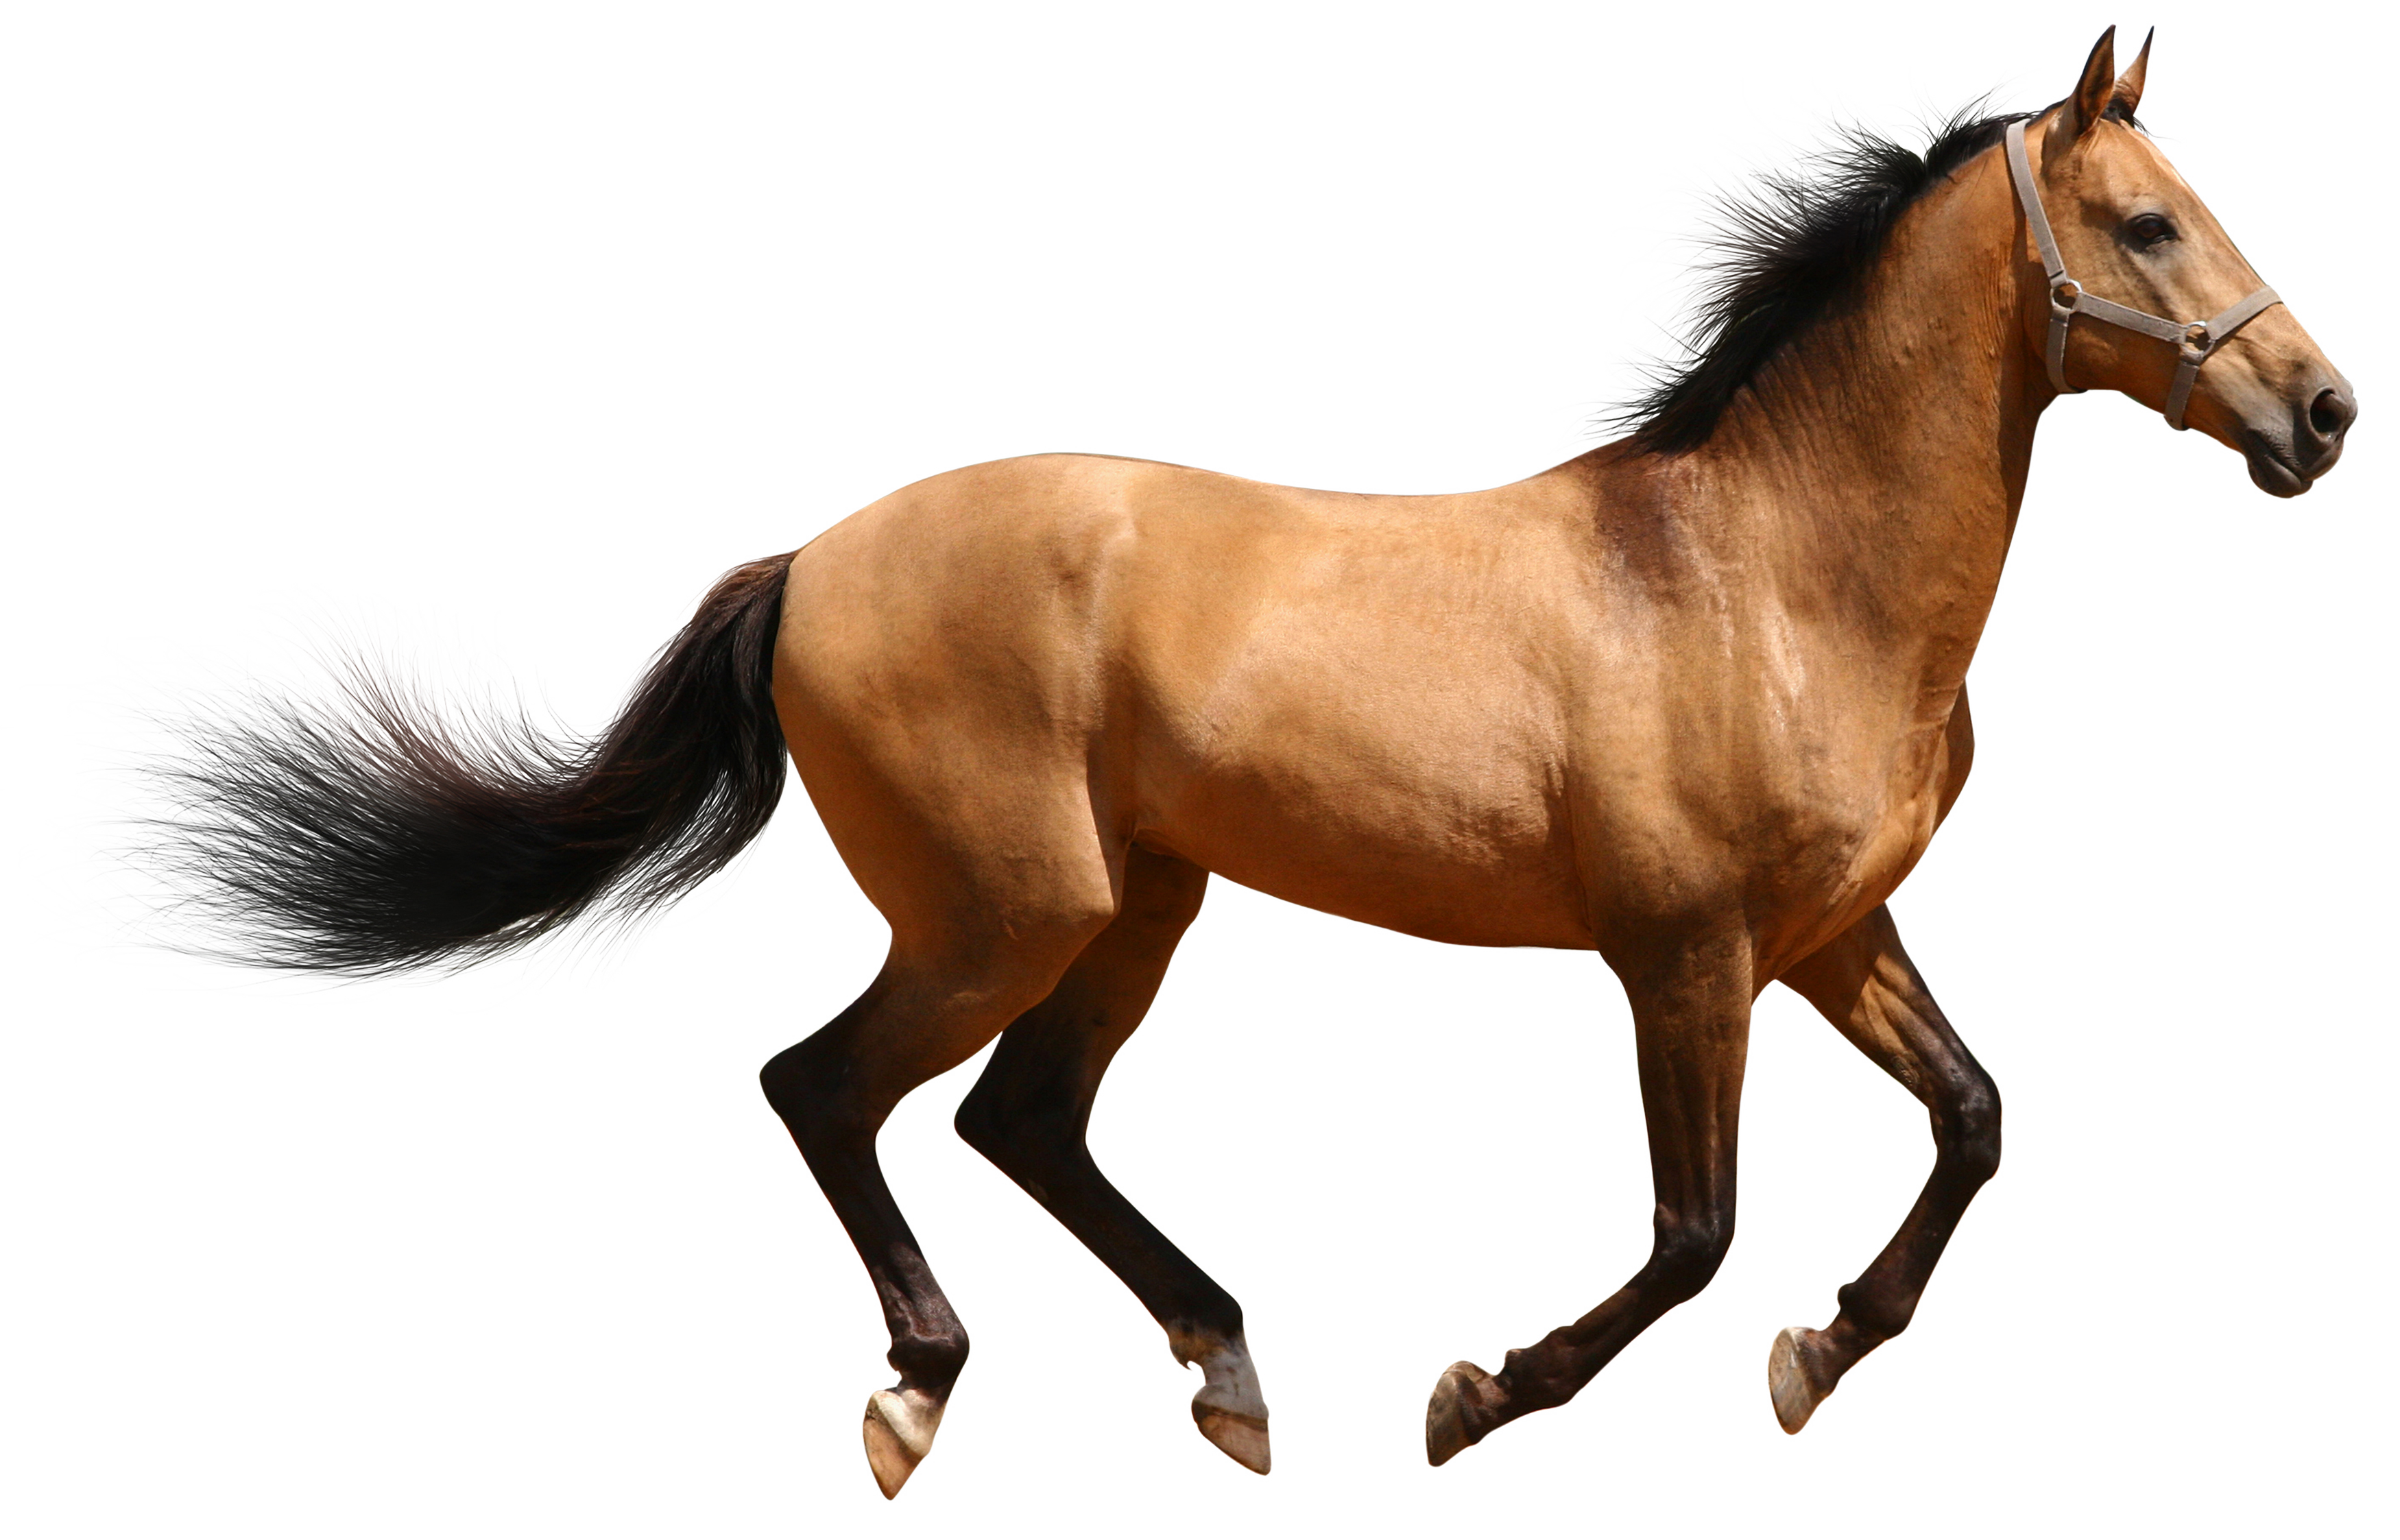 clipart image of horse - photo #44